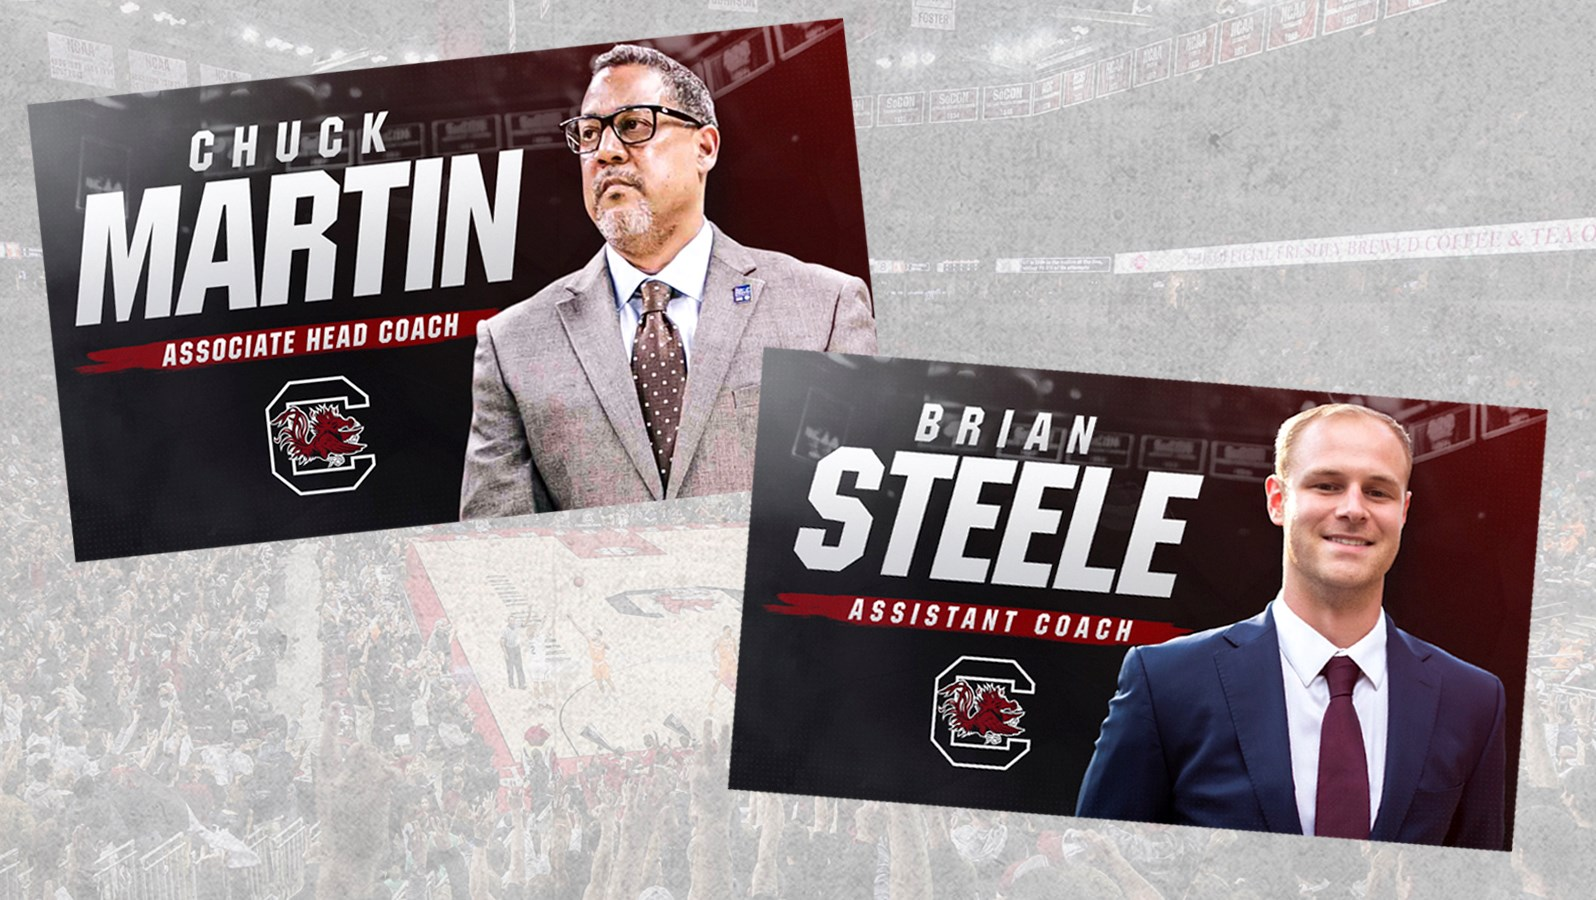 Chuck Martin Named Associate Head Coach, Steele Promoted To Assistant Coach